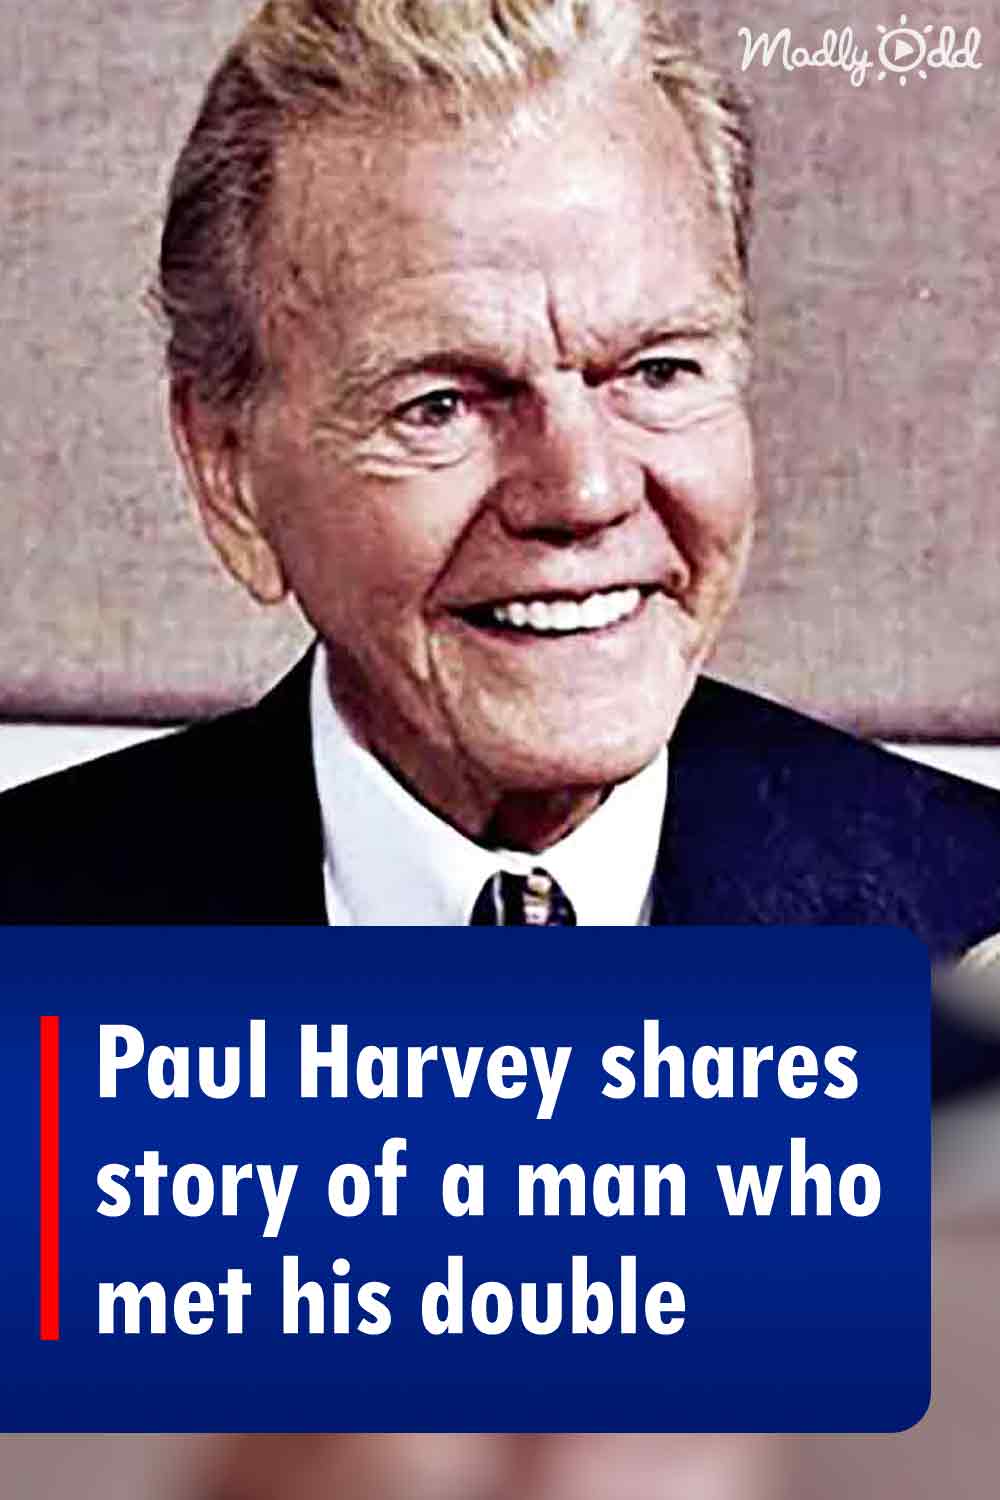 Paul Harvey shares story of a man who met his double